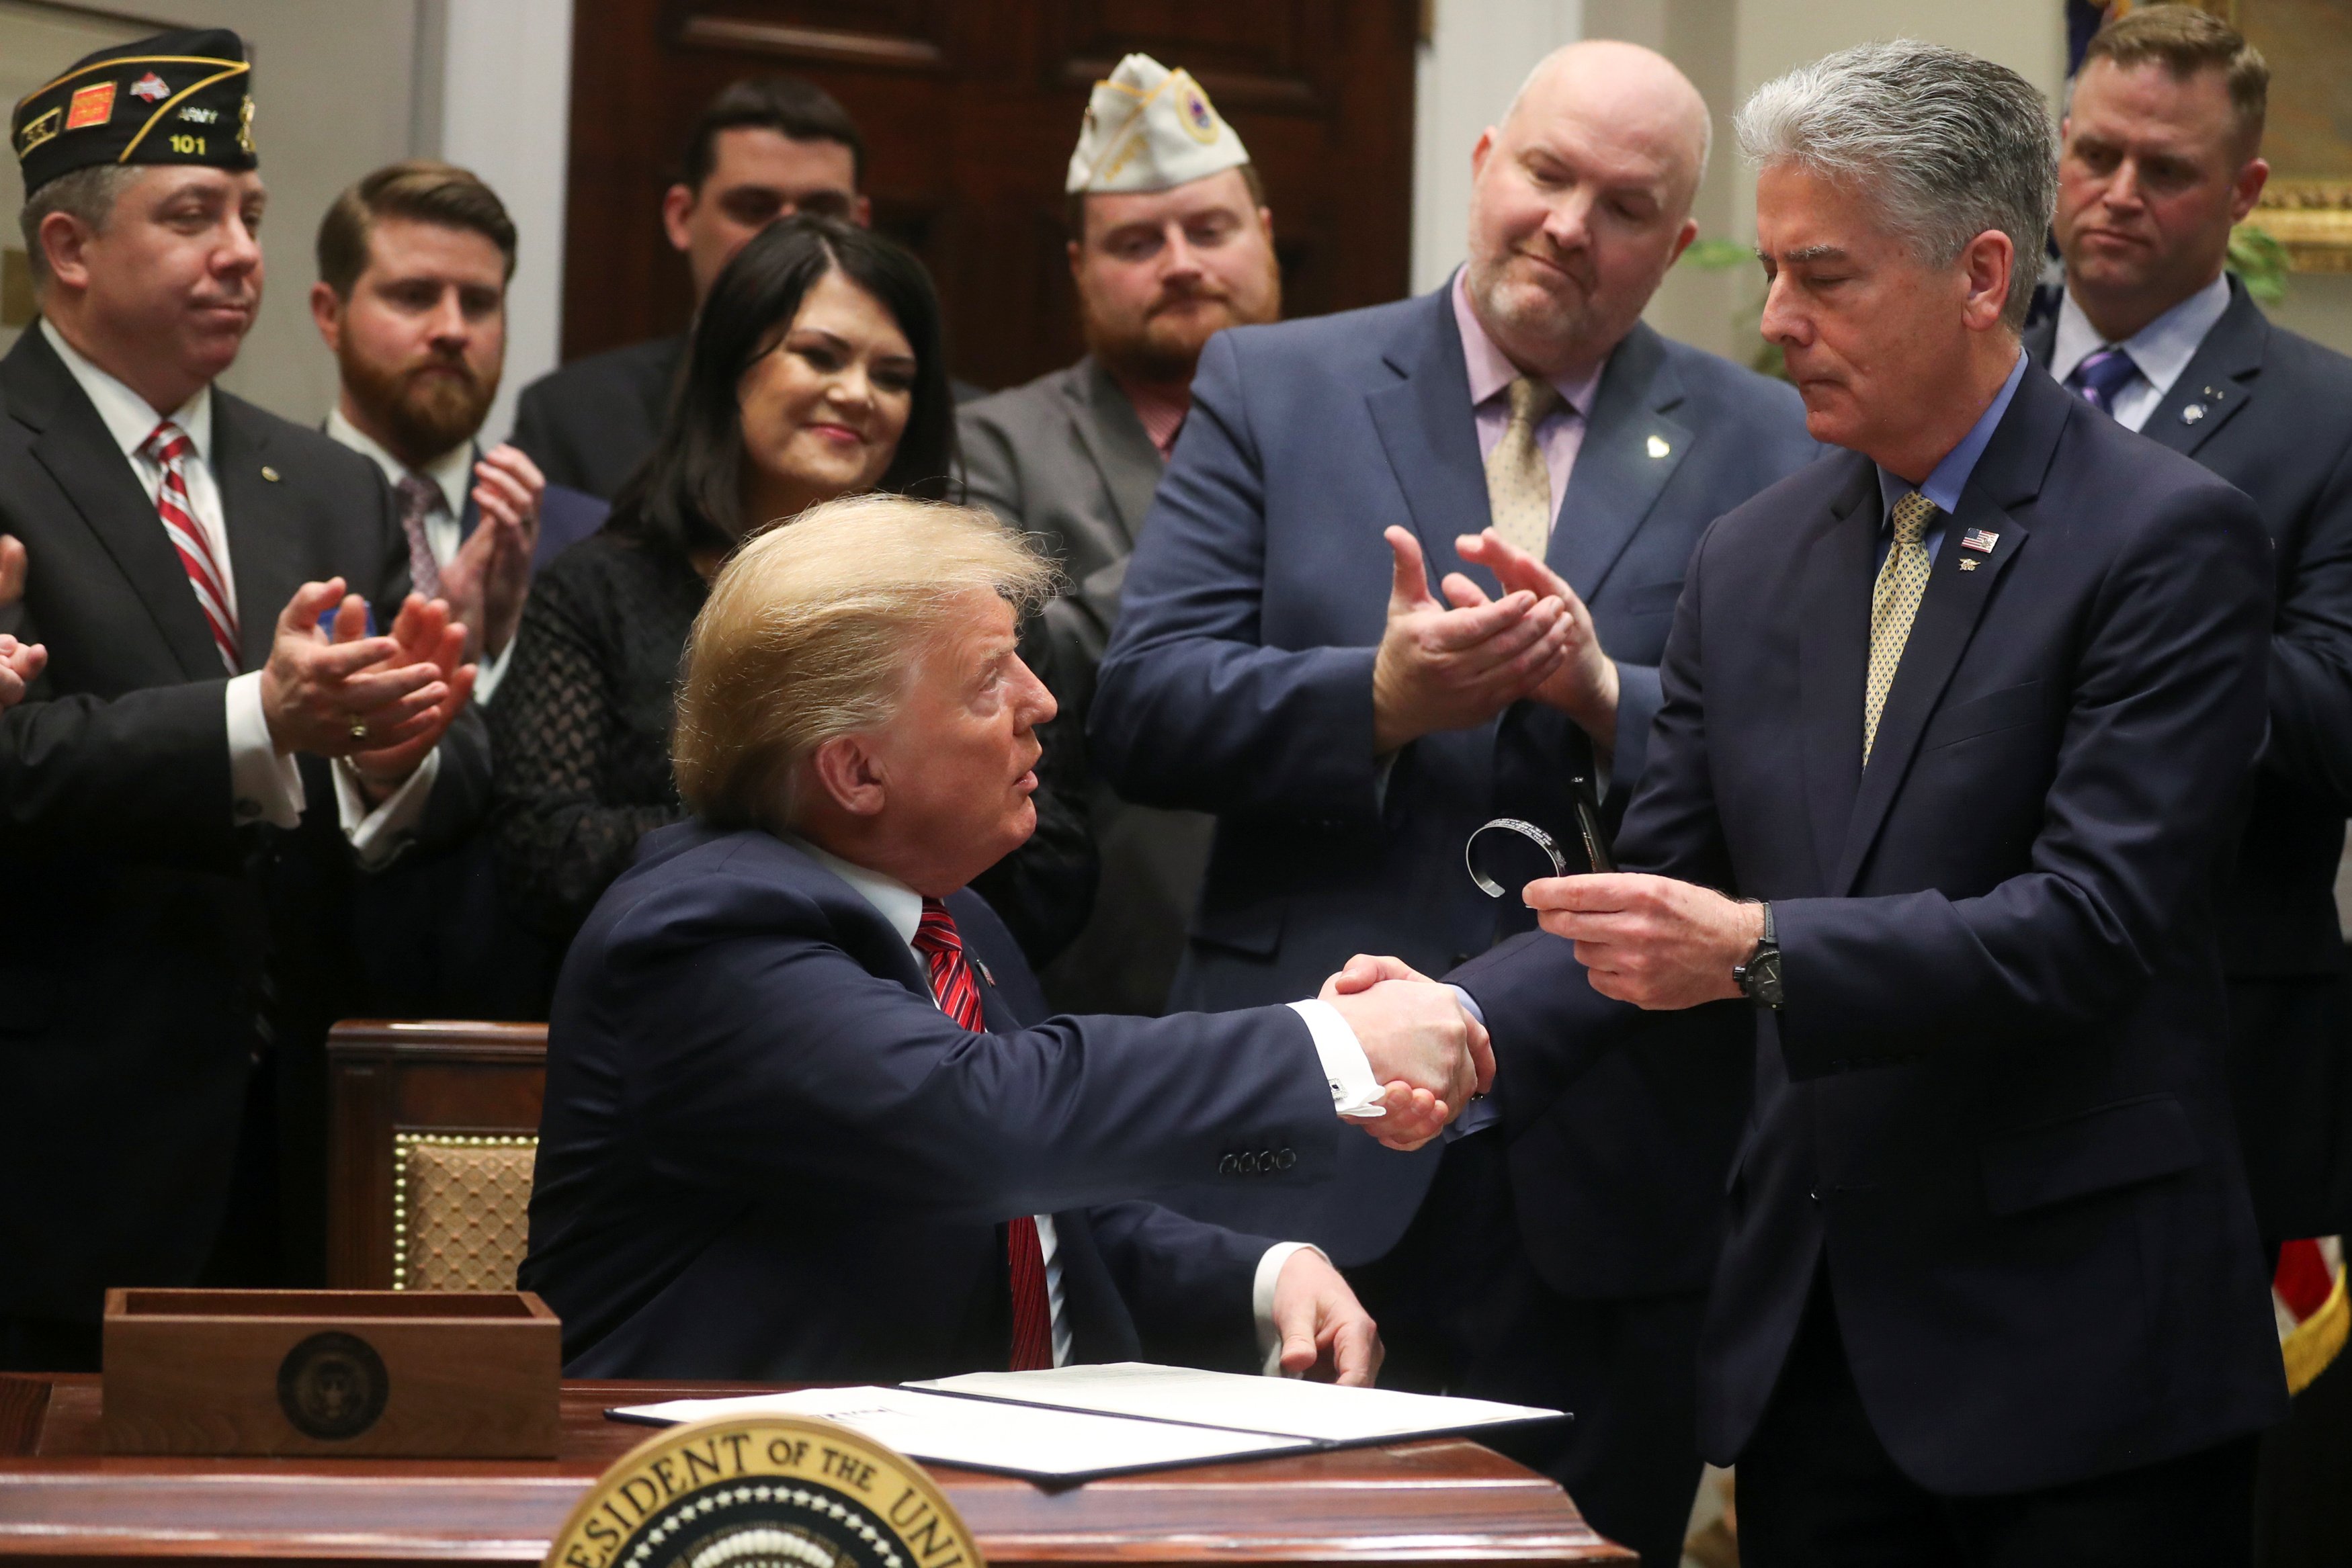 U.S. President Donald Trump shakes hands with former U.S. Navy SEAL and former Sergeant at Arms of the U.S. Senate Frank Larkin, whose son and fellow SEAL Ryan took his own life in April 2018, before Trump signed an executive order on veterans suicide prevention in the Roosevelt Room at the White House in Washington, U.S., March 5, 2019. REUTERS/Jonathan Ernst